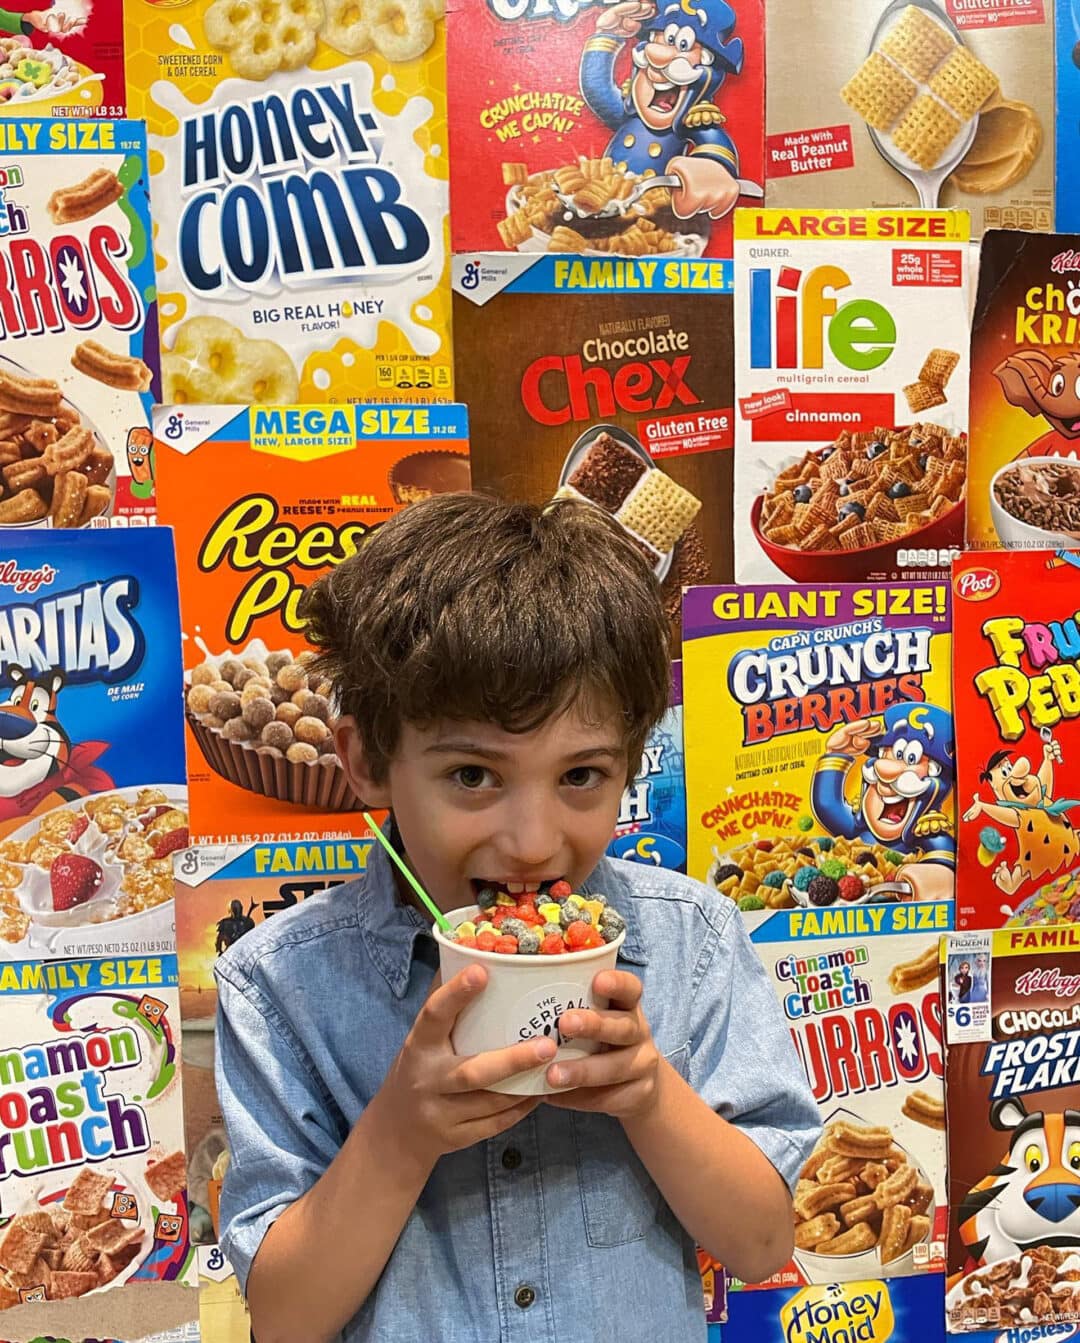 a boy stands eating a cup of cereal in front of a wall of cereal boxes